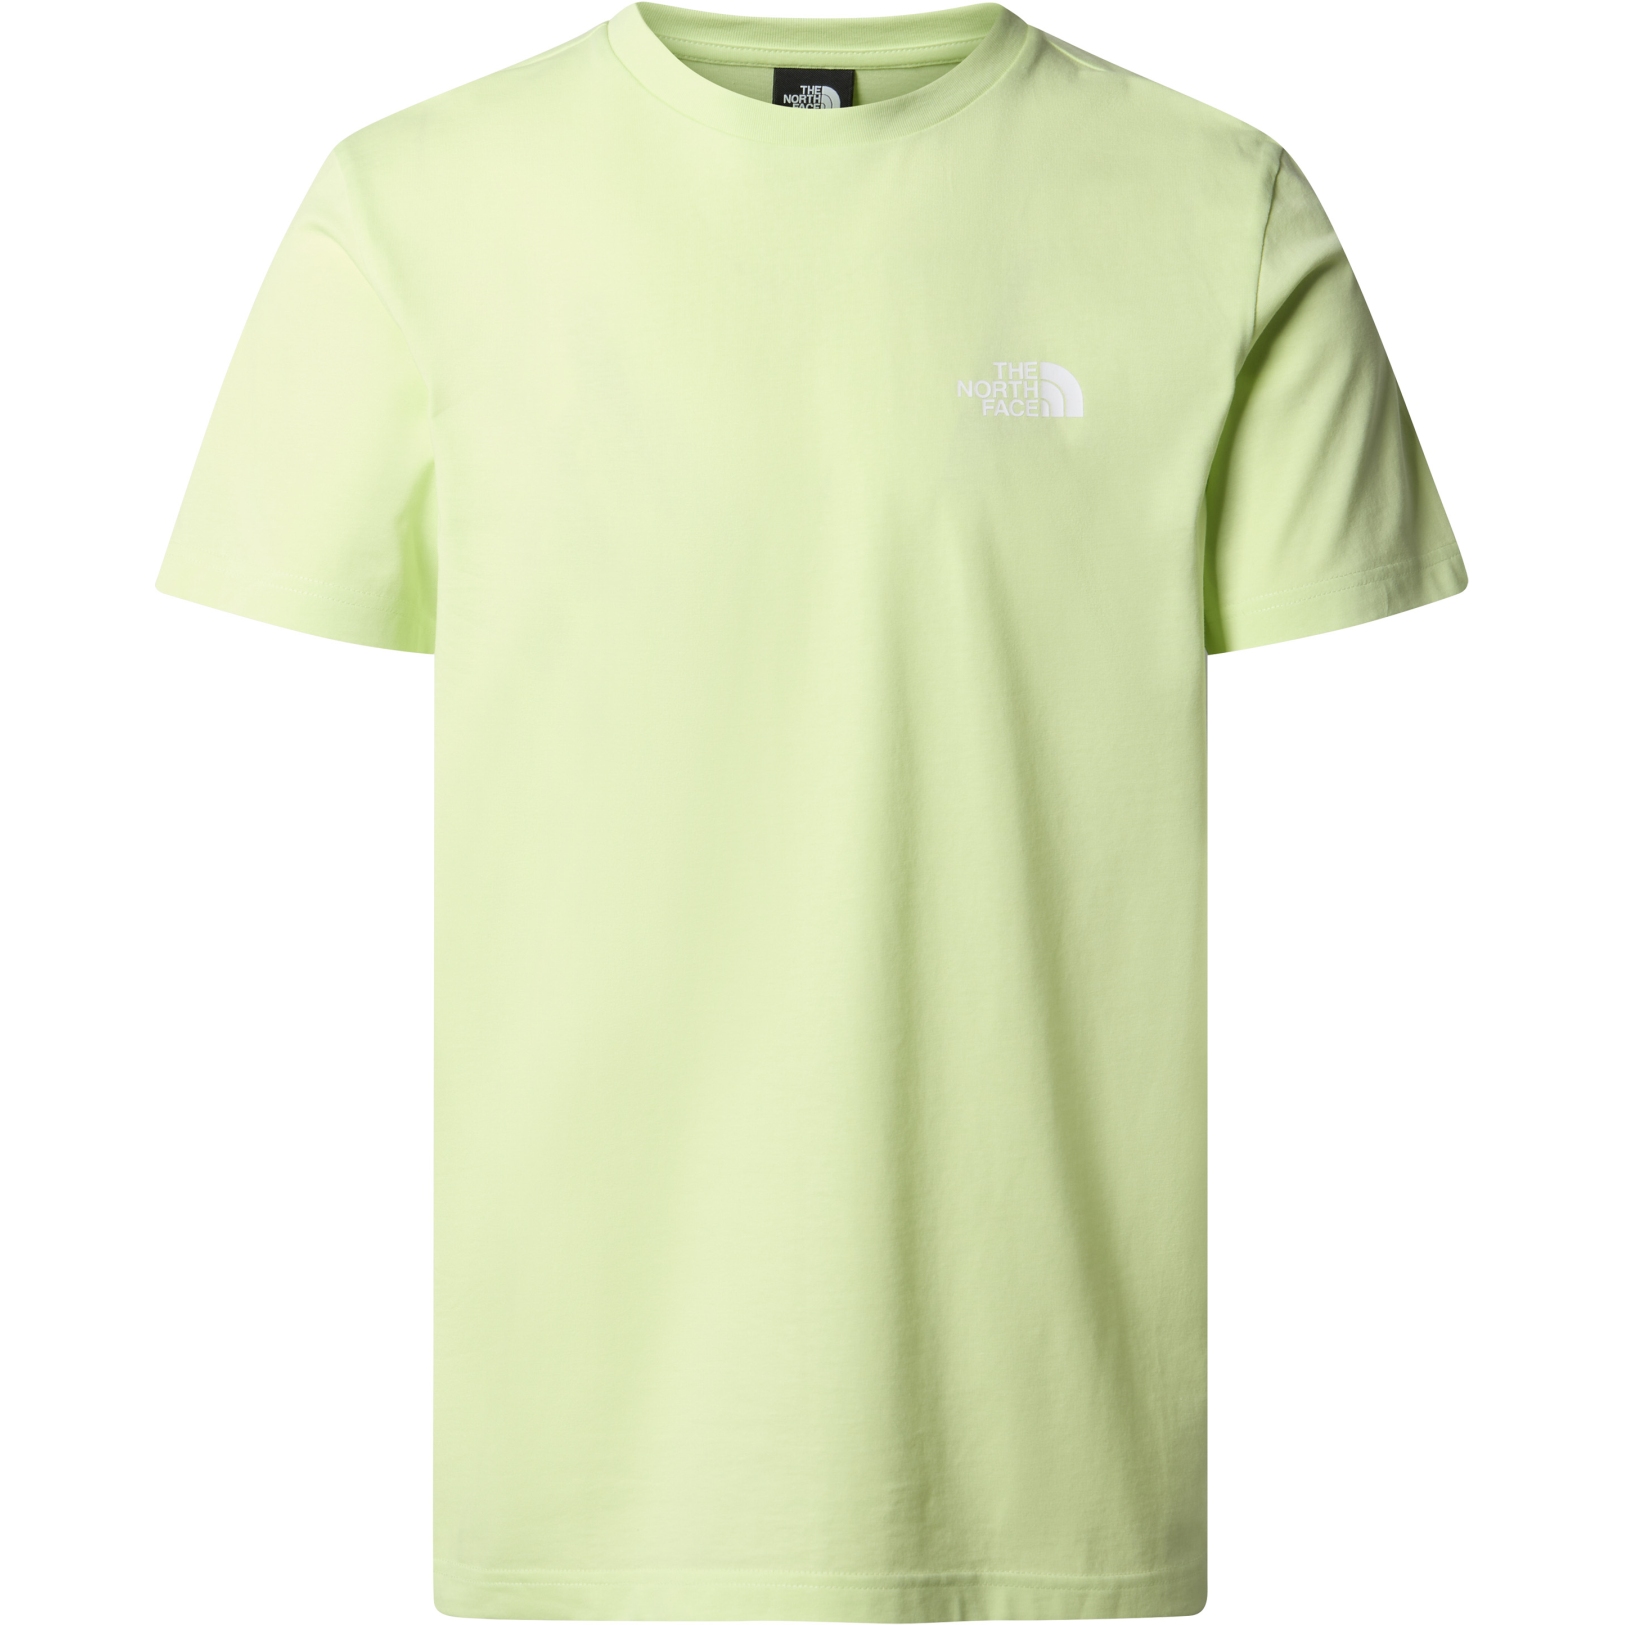 Picture of The North Face Simple Dome T-Shirt Men - Astro Lime